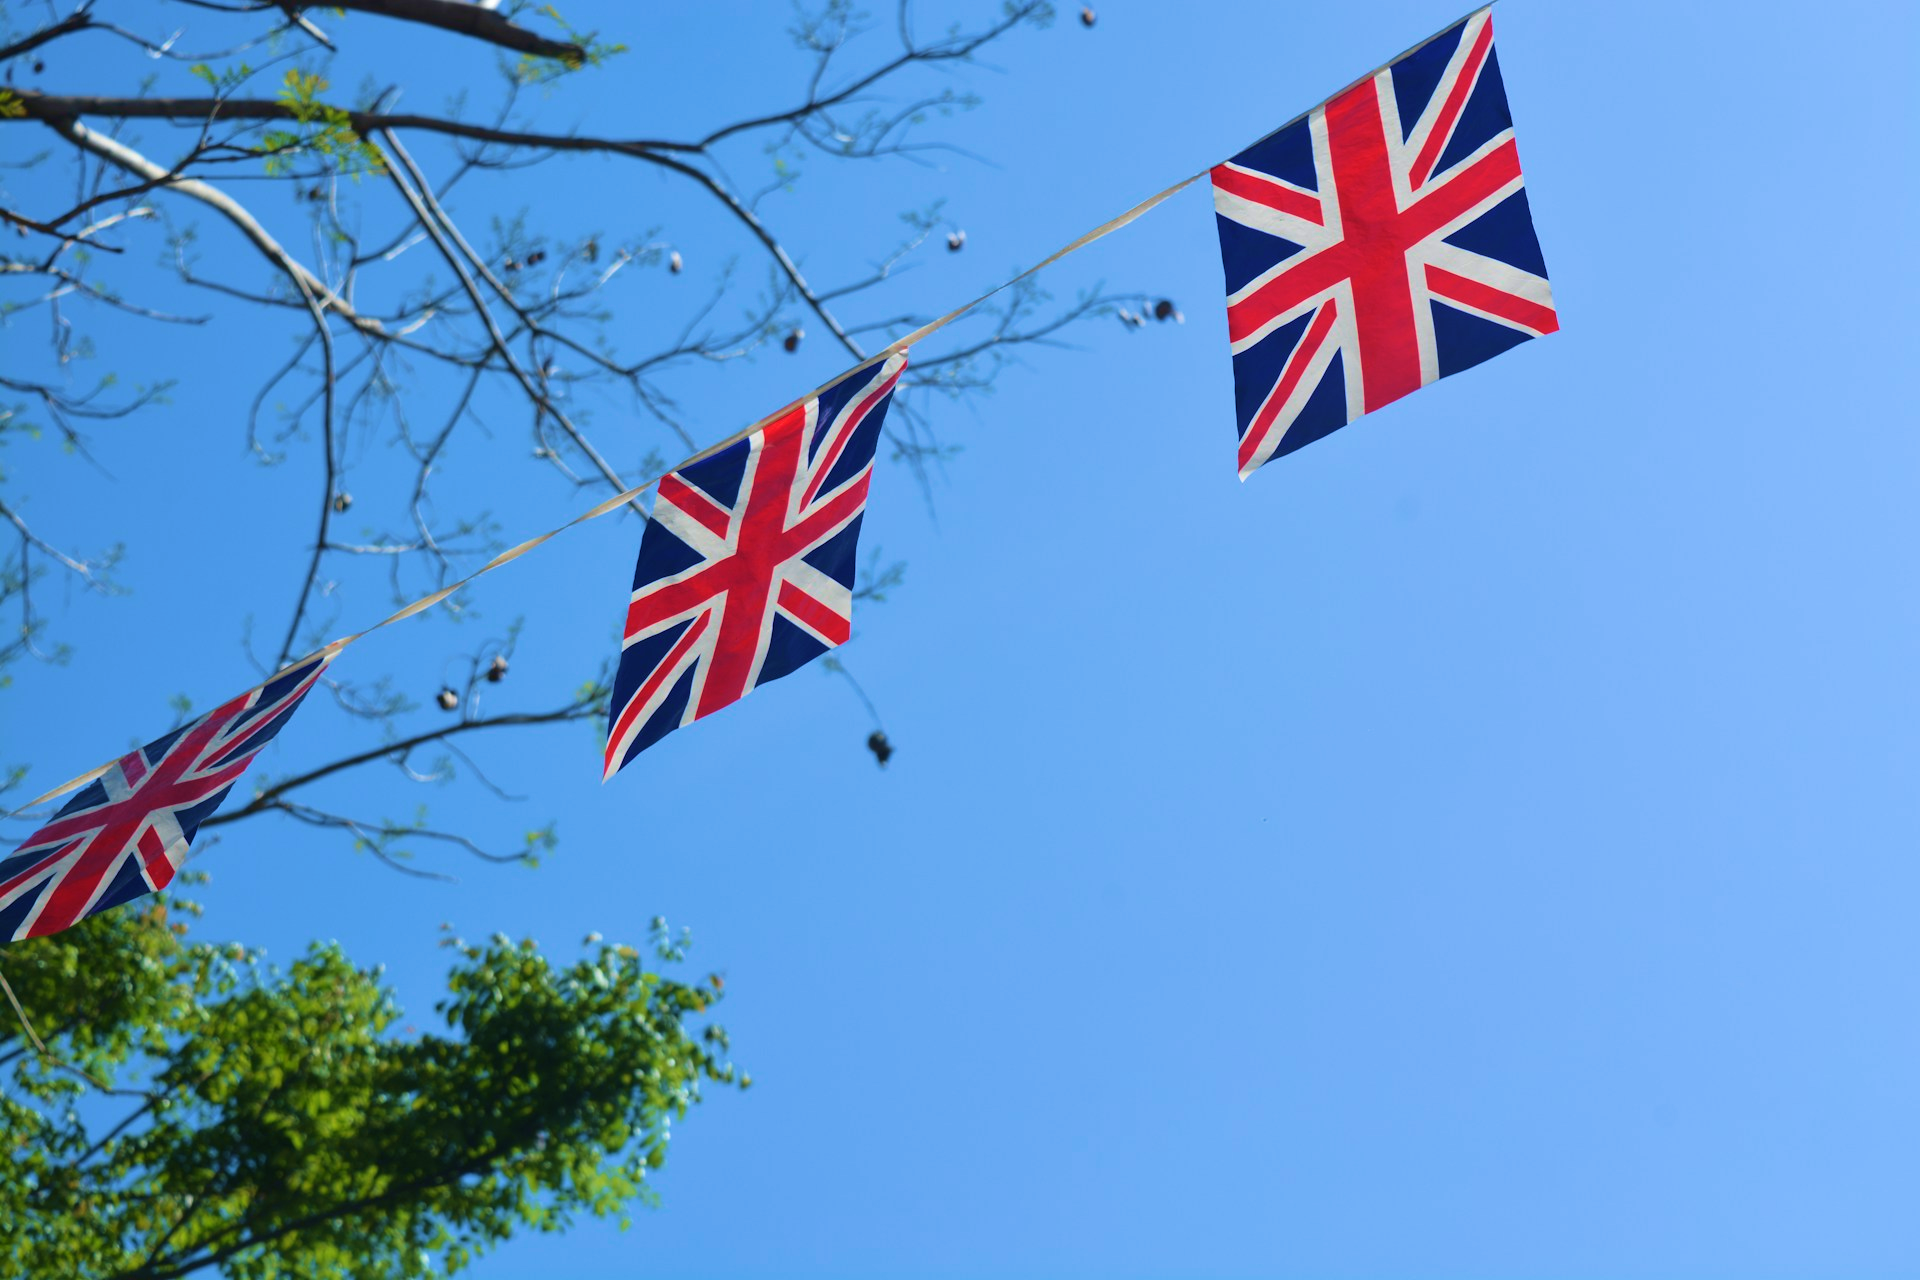 There are some small British flags in a blue sky